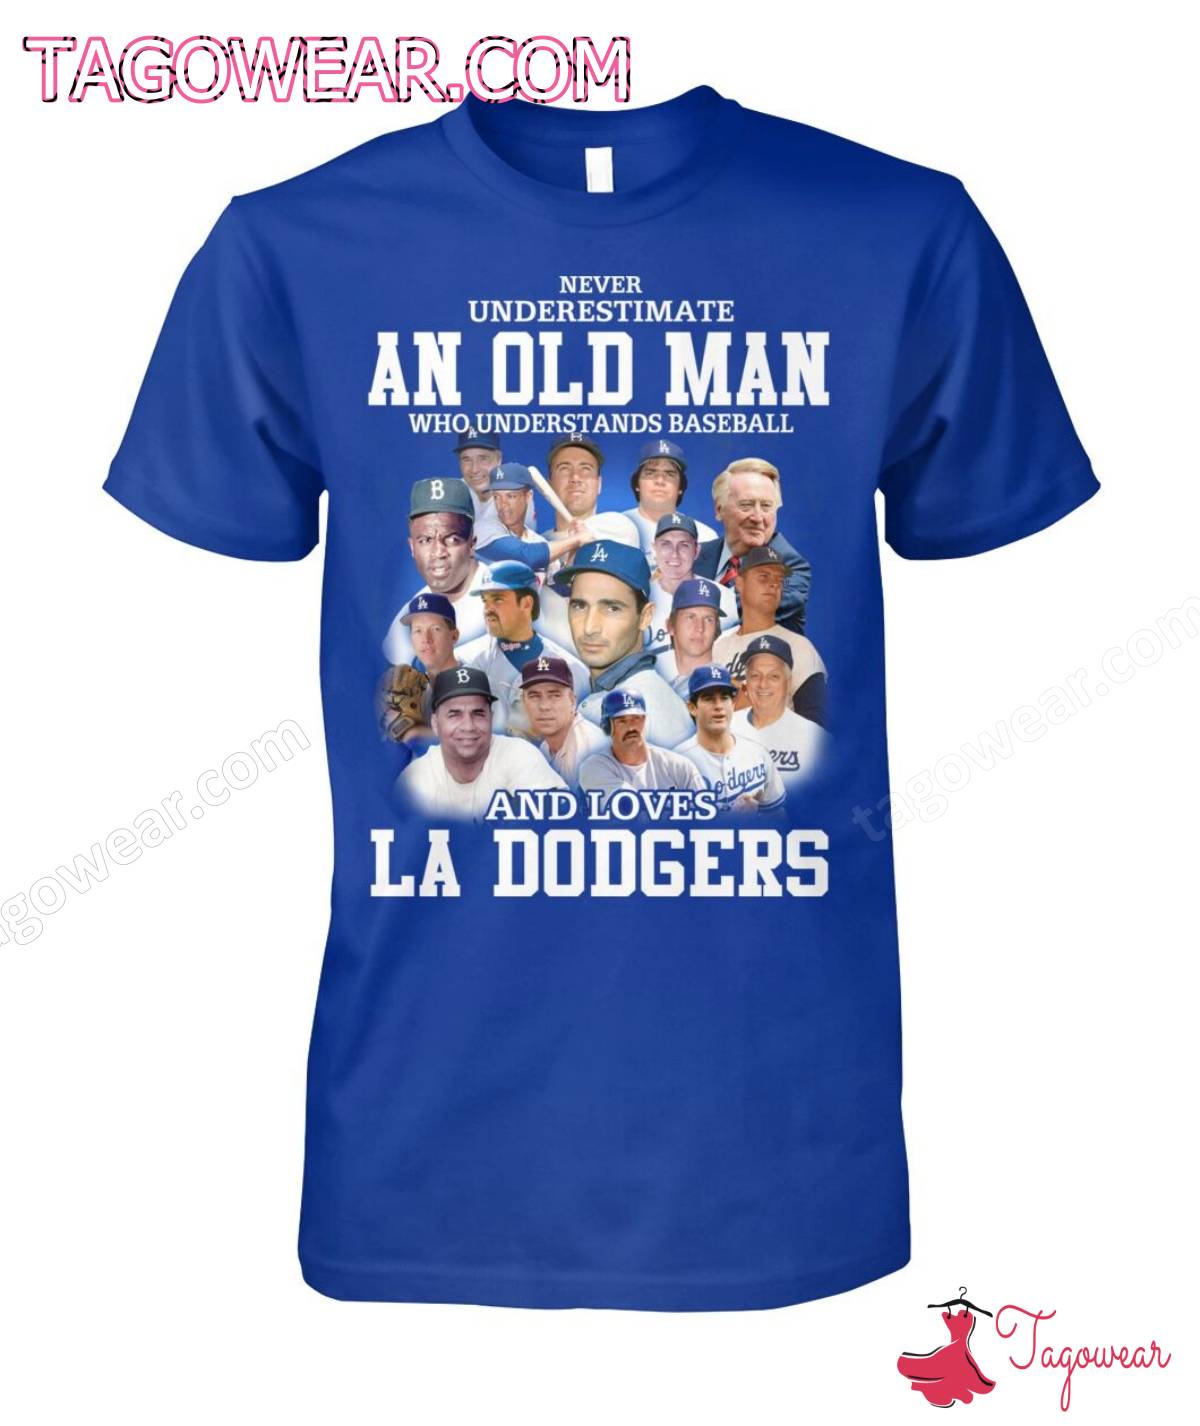 Never Underestimate An Old Man Who Understands Baseball And Loves La Dodgers Shirt